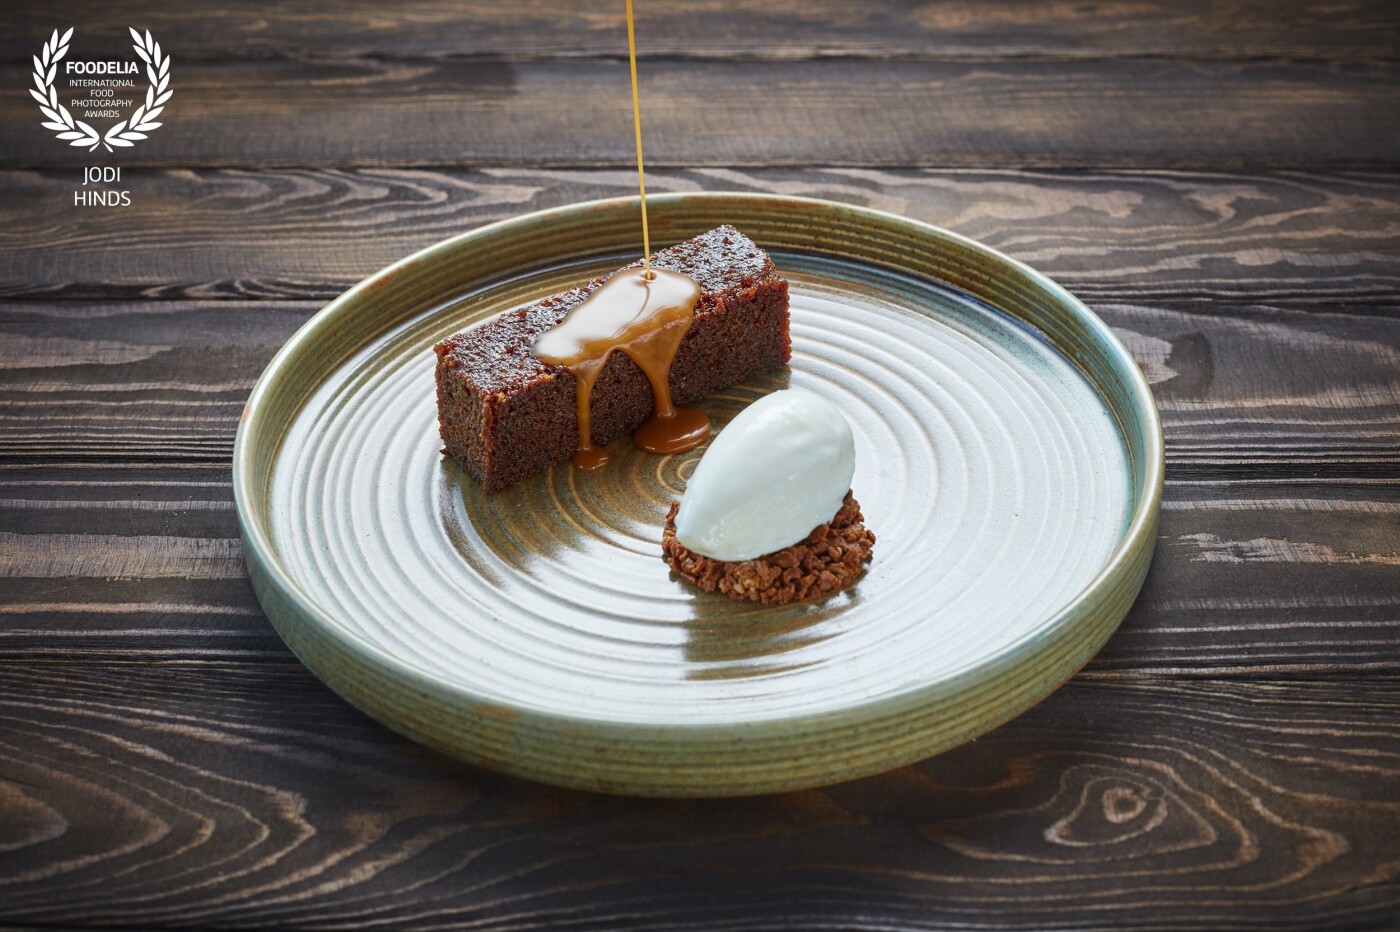 Sticky Toffee Pudding with caramel sauce doesn't get better as we go into autumn.  Another delight from chef Mike Reid.<br />
<br />
Photographer: @jodihindsphoto<br />
Chef: @mikereidchef<br />
Restaurant: @mbarandgrill<br />
